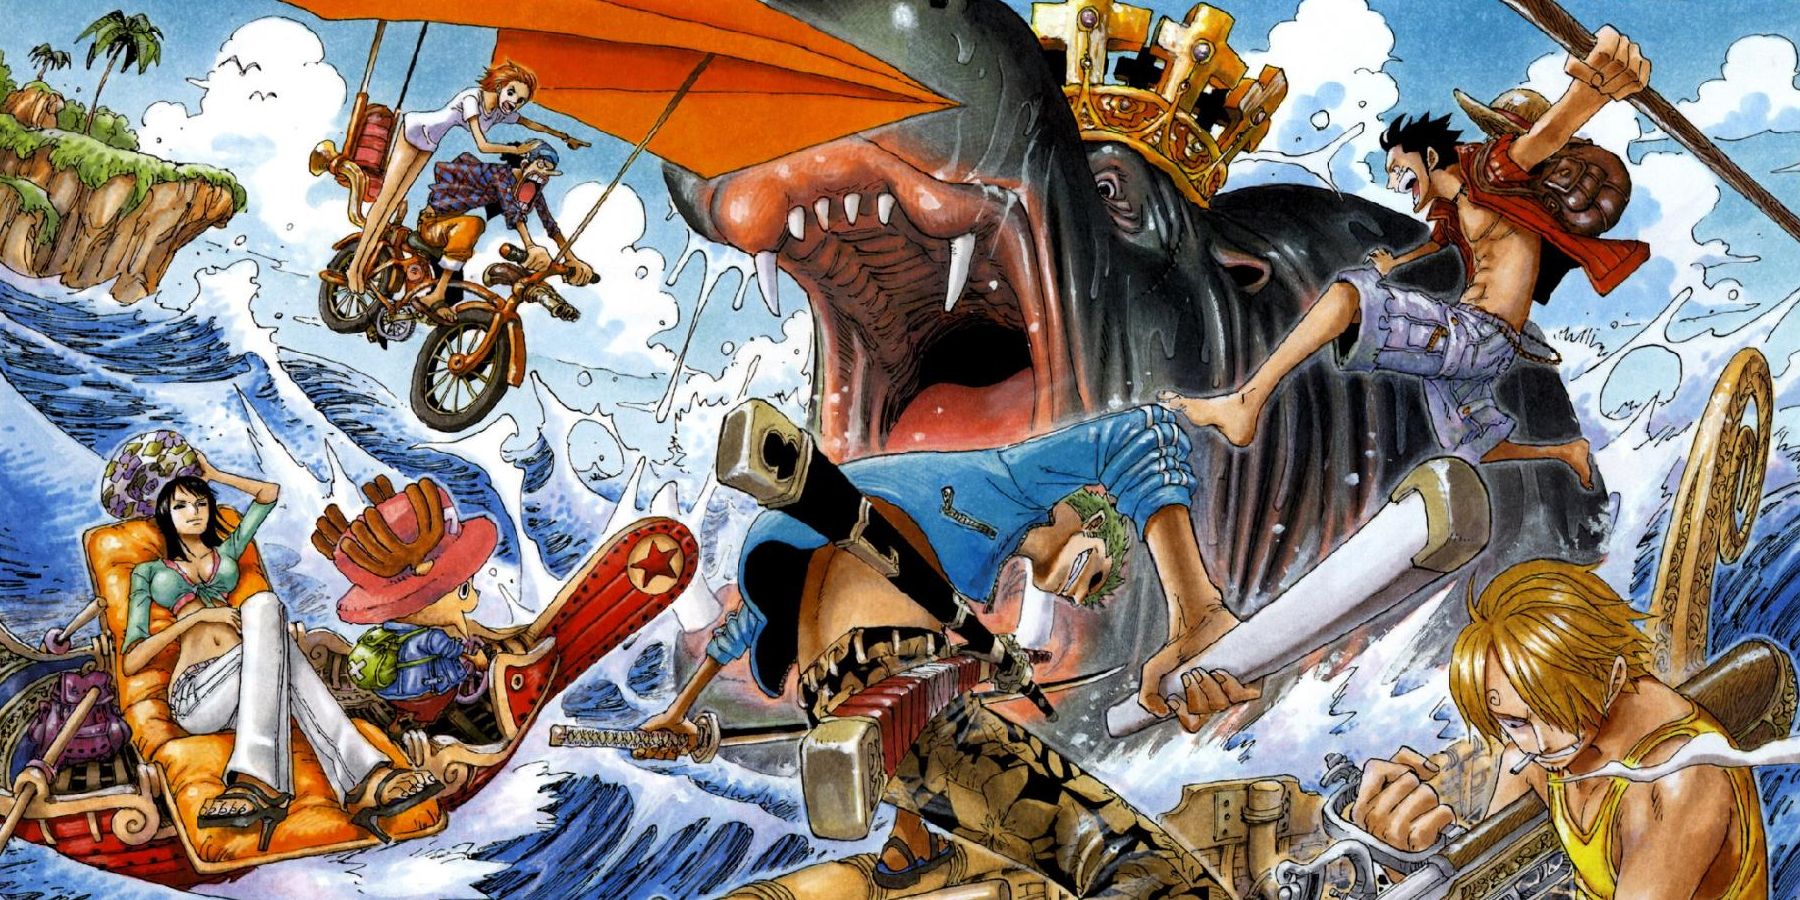 Colored manga panel from One Piece chapter 364 shows Luffy and the Straw Hats on some rough waters as they prepare to fight a large hippo with a crown.